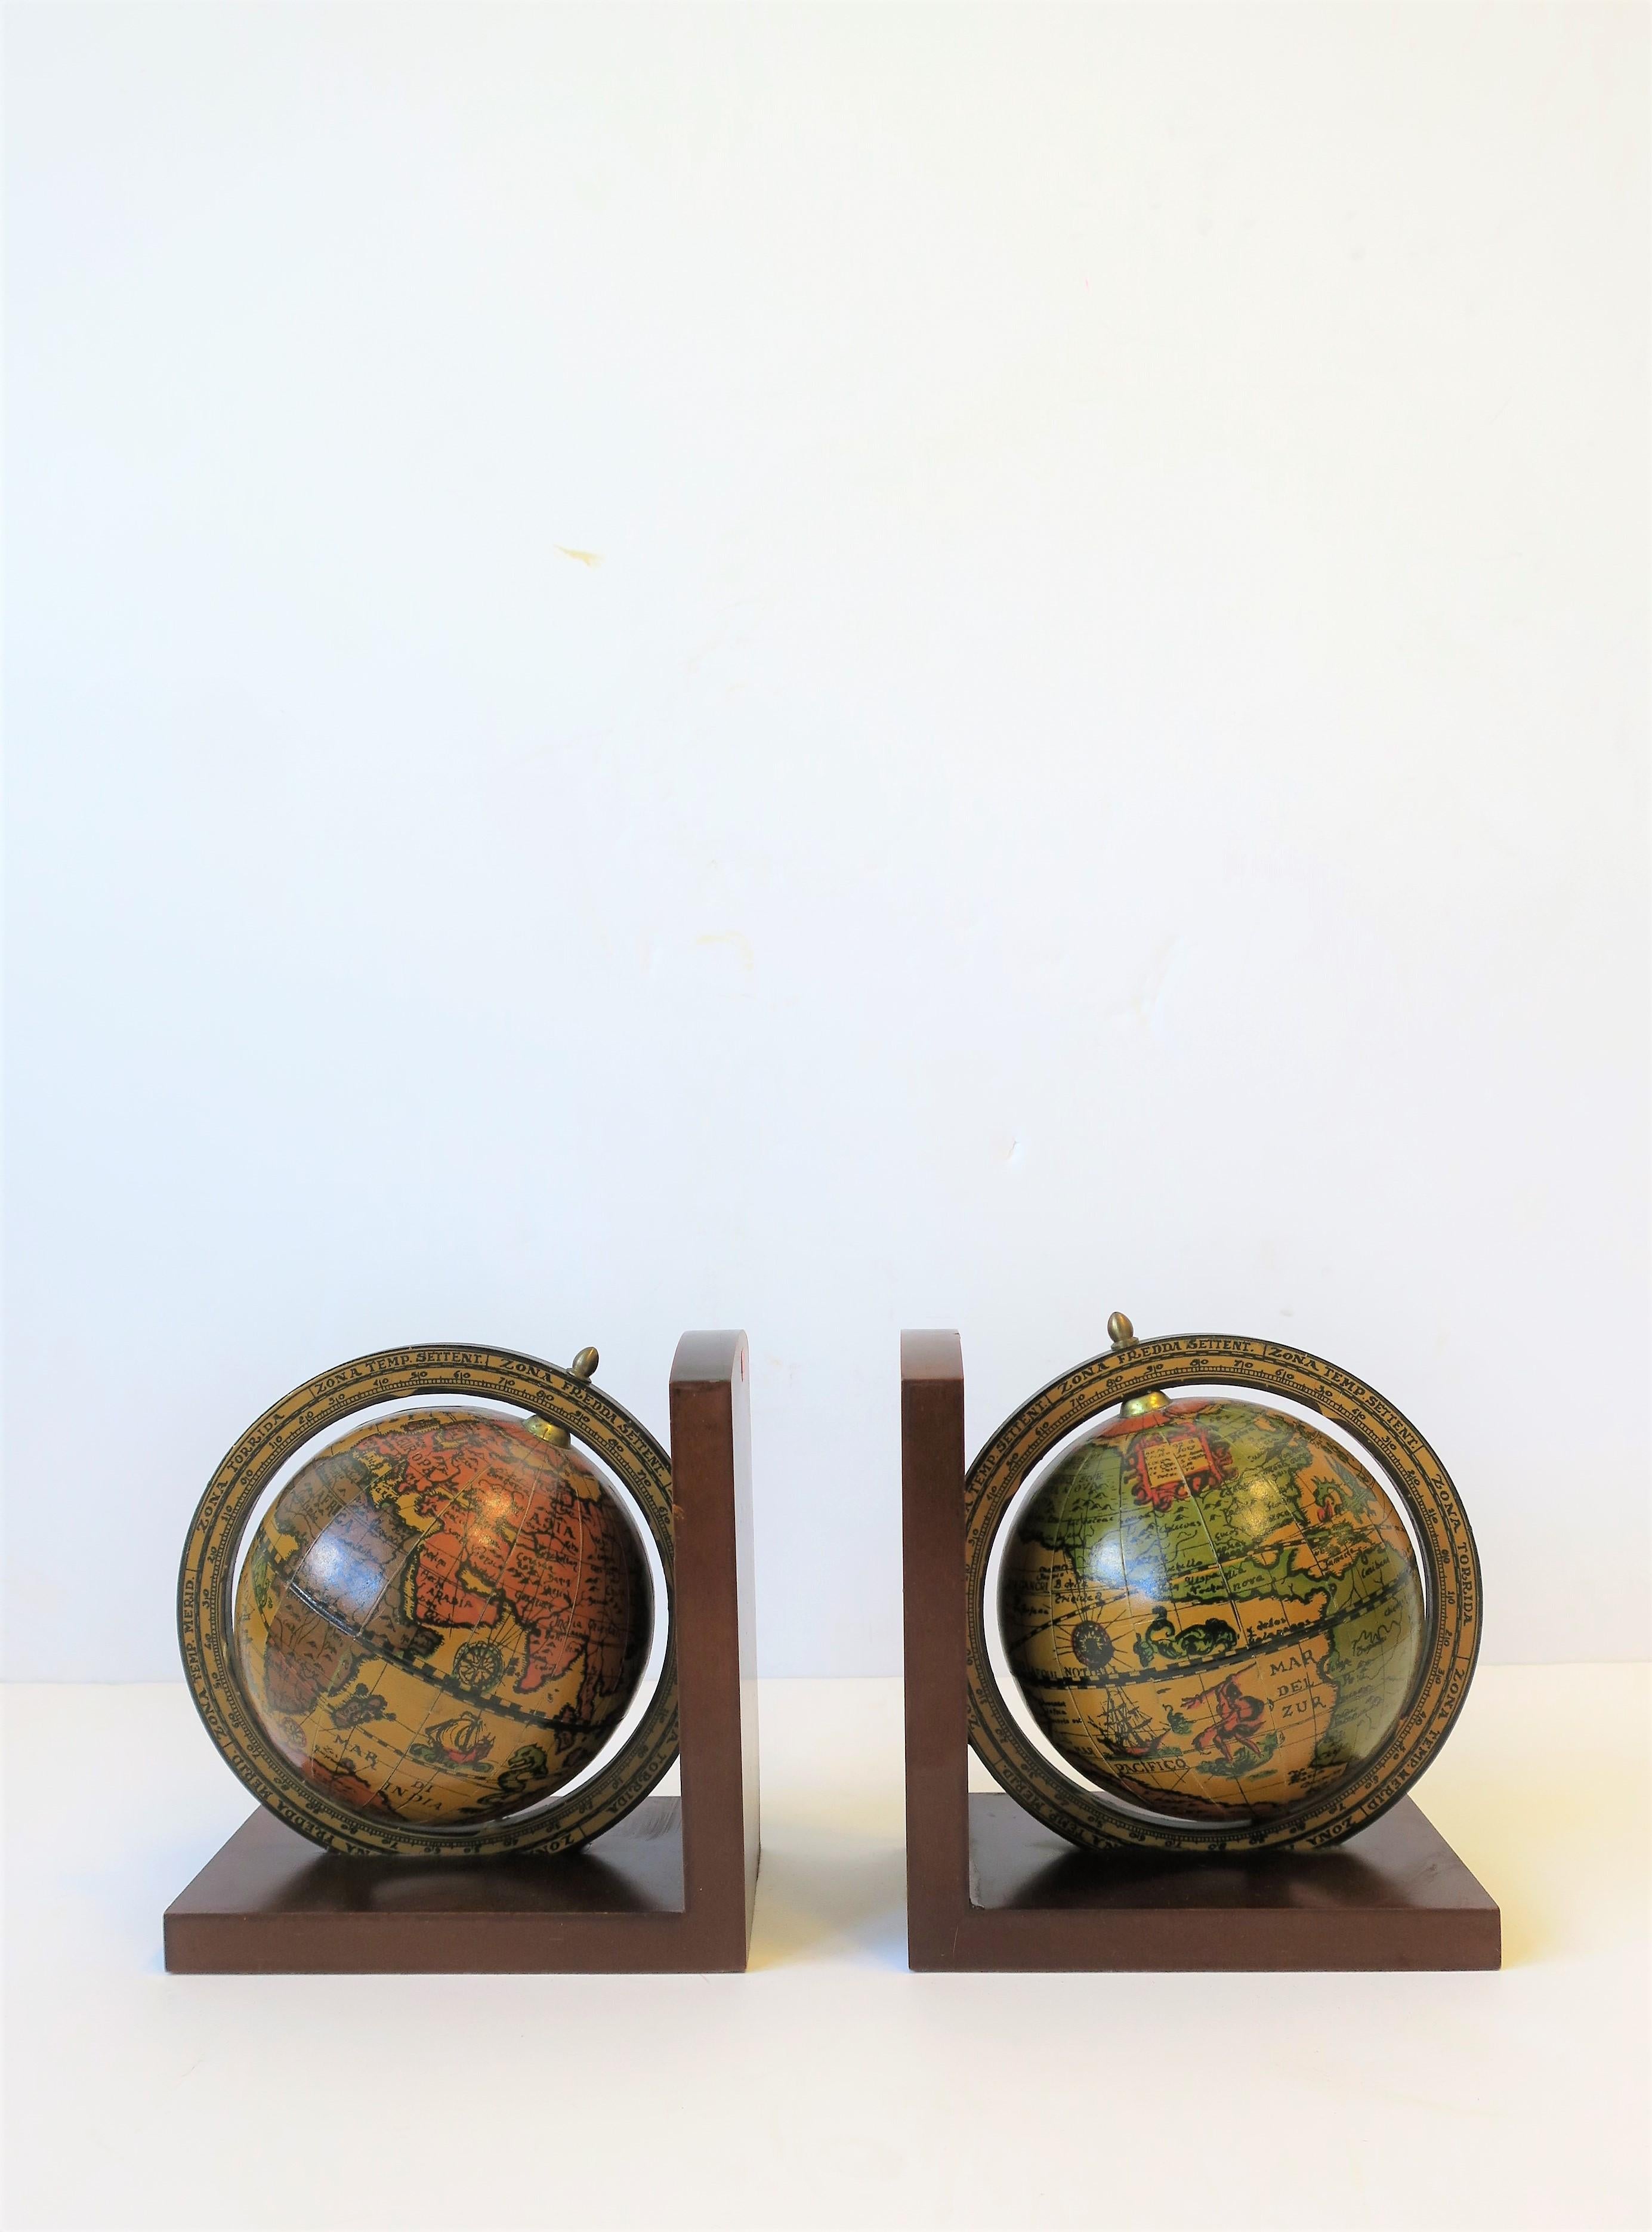 A midcentury pair of Italian world globe bookends with brass accents.
Marked 